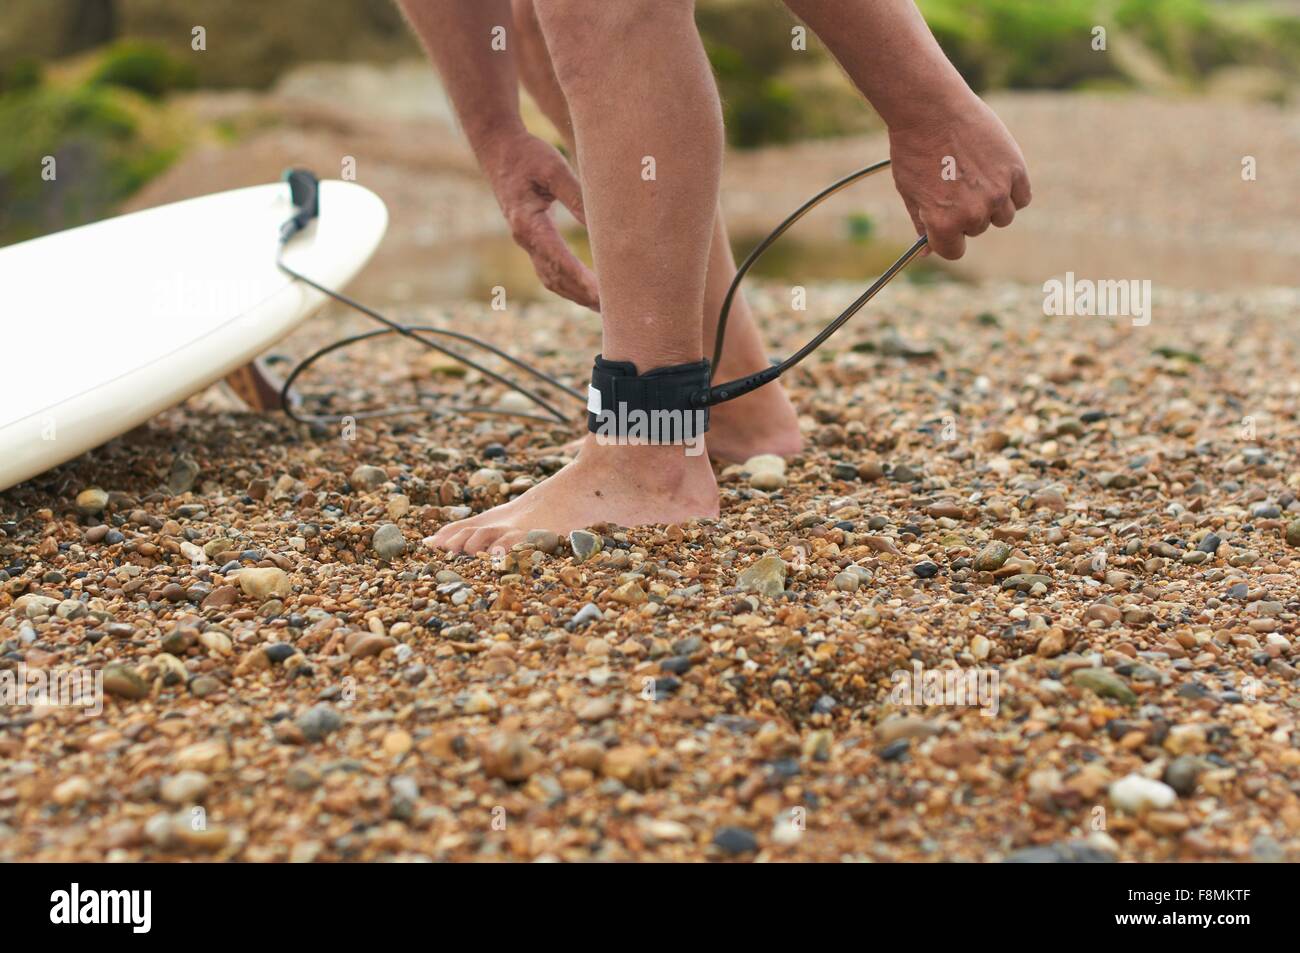 Surfer tying surfboard leash to ankle Stock Photo